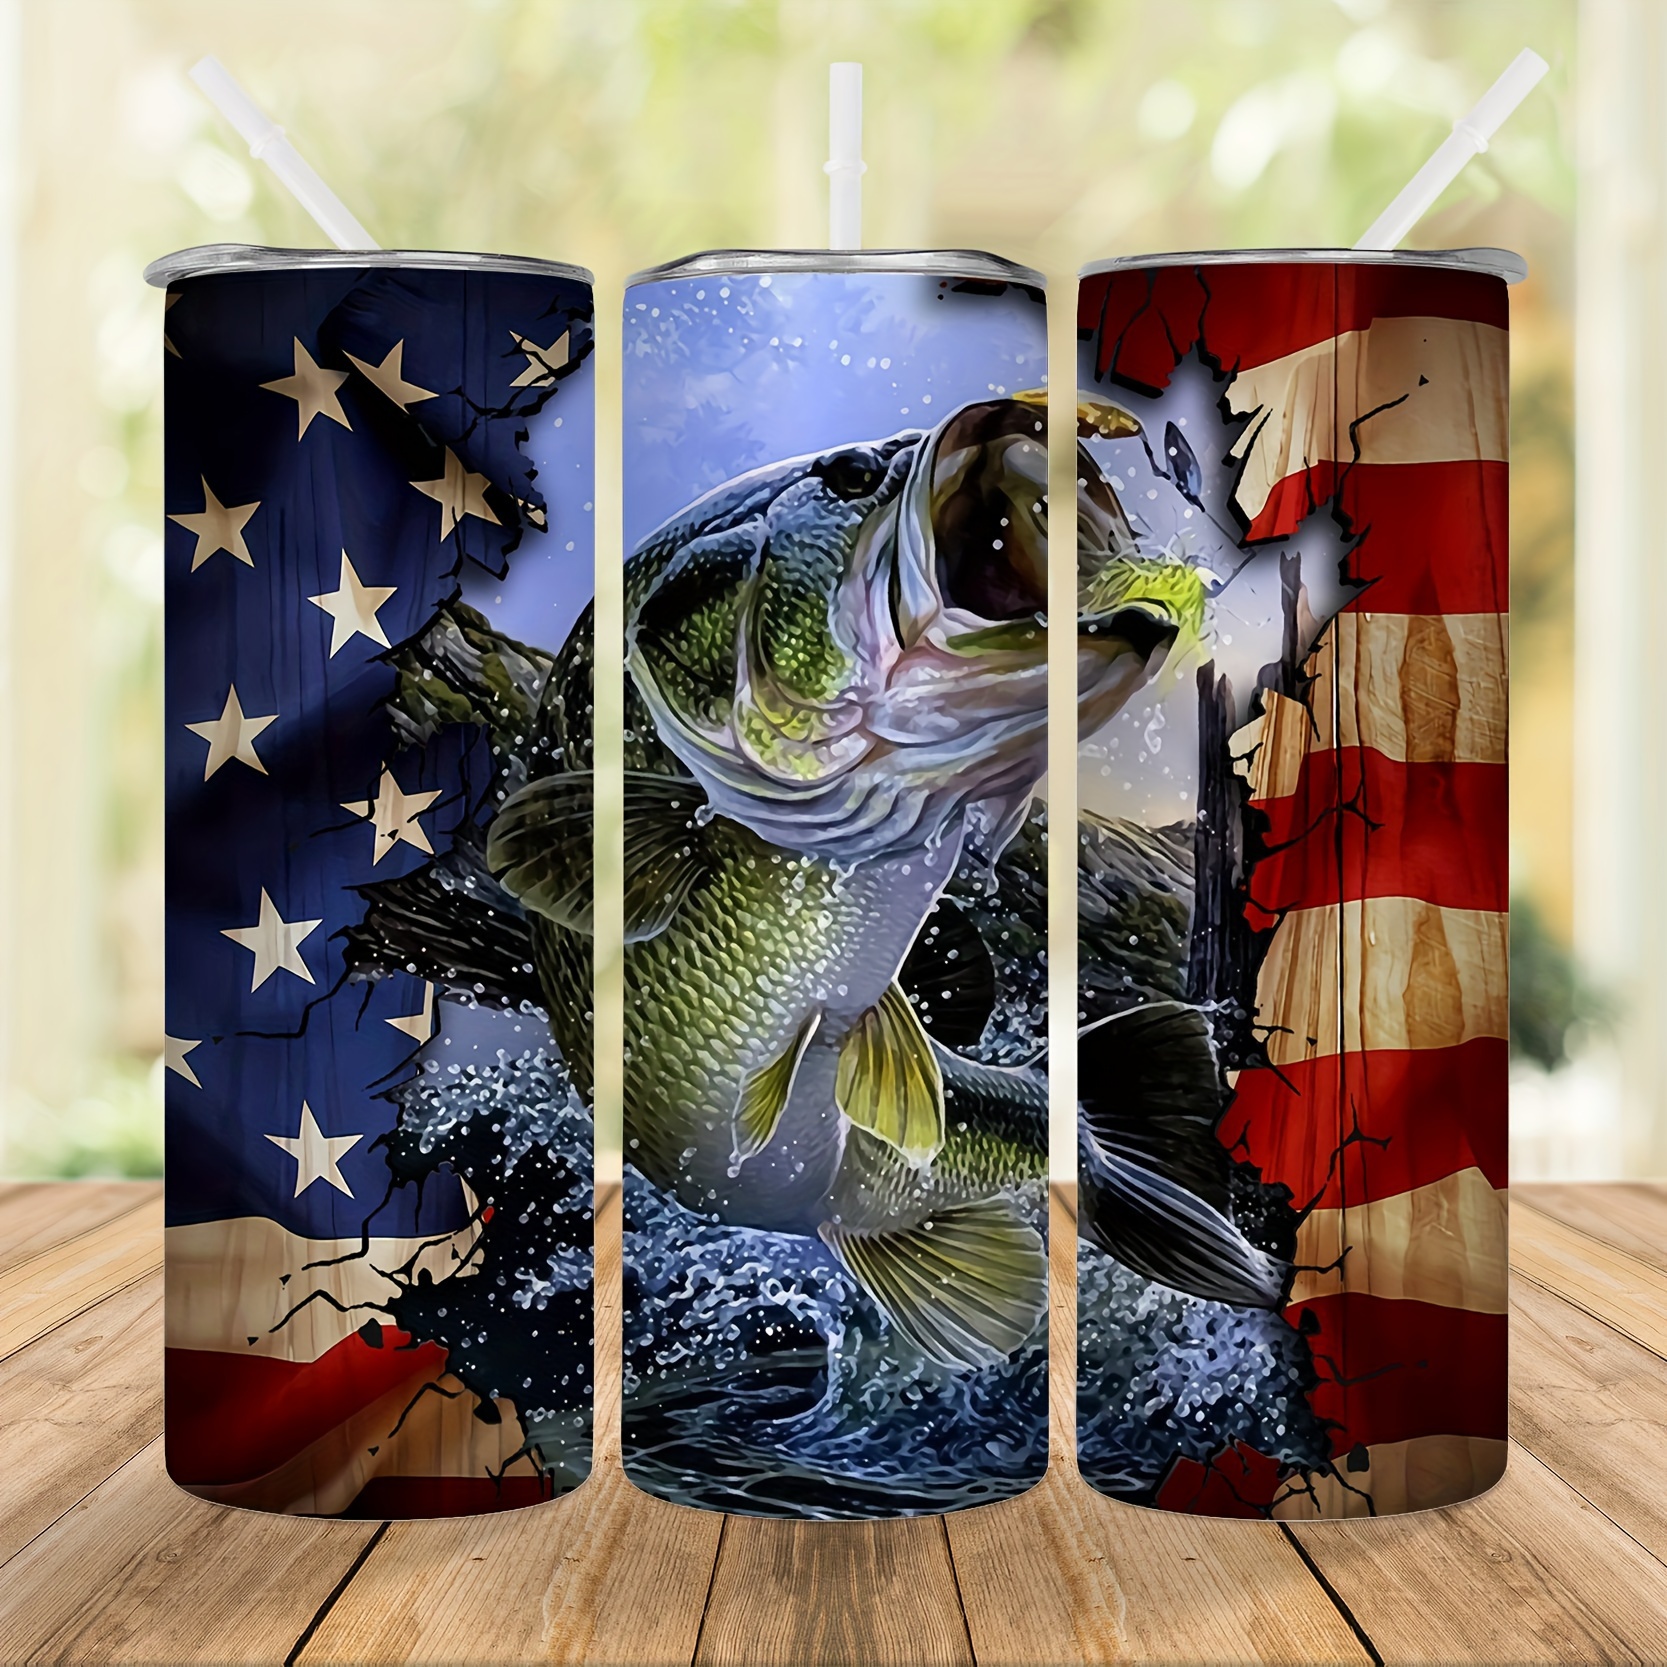 Bass Fishing Fish American Flag Dad Father Fourth Of July Poster